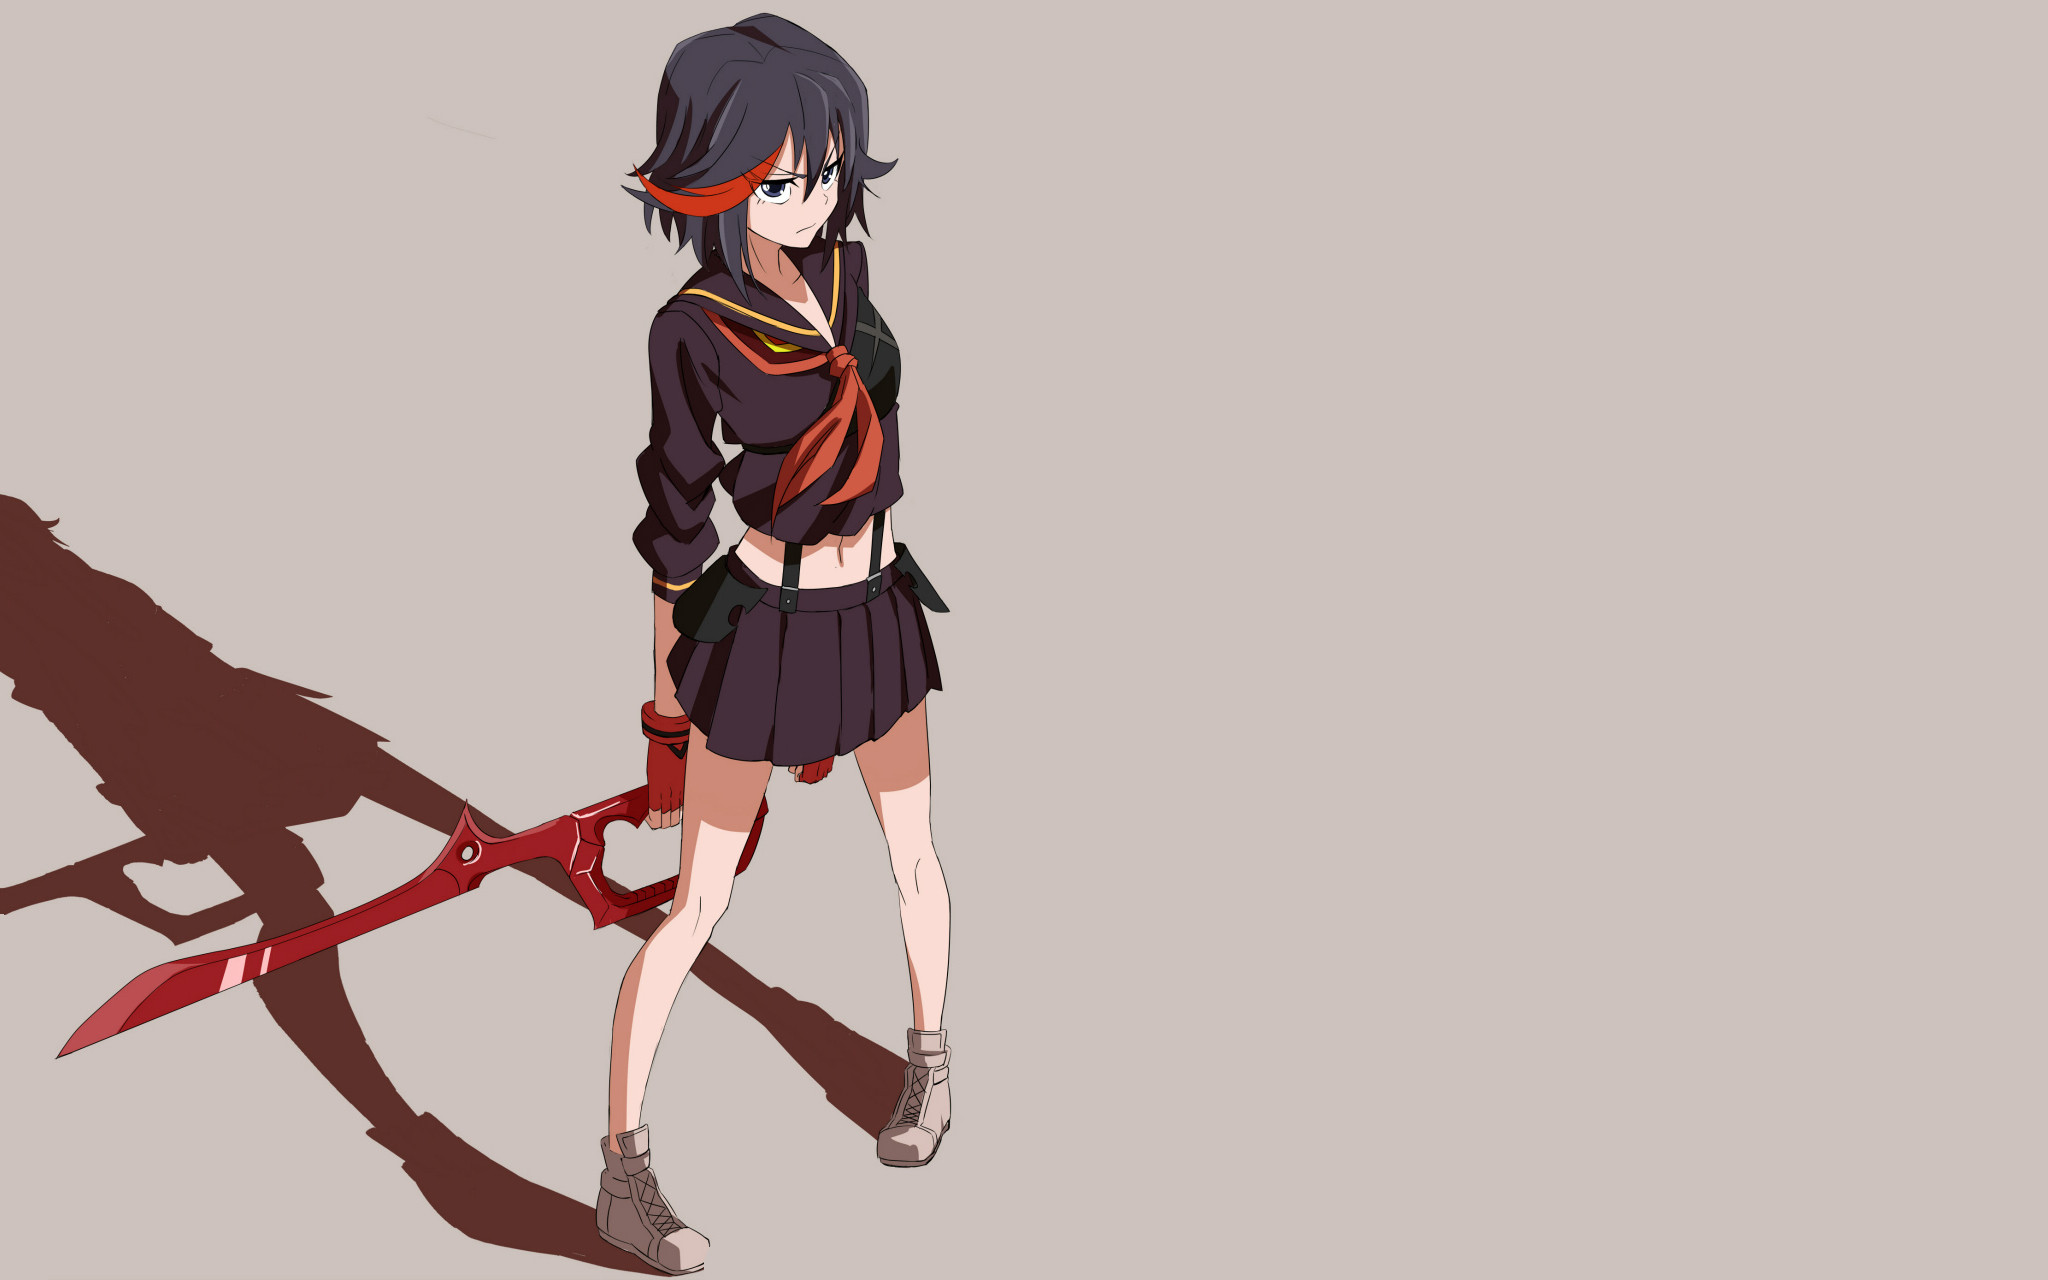 Featured image of post Ultra Hd Ryuko Matoi Wallpaper Best hd wallpaper download best hd desktop wallpapers widescreen wallpapers for free in high quality resolutions 1920x1080 hd